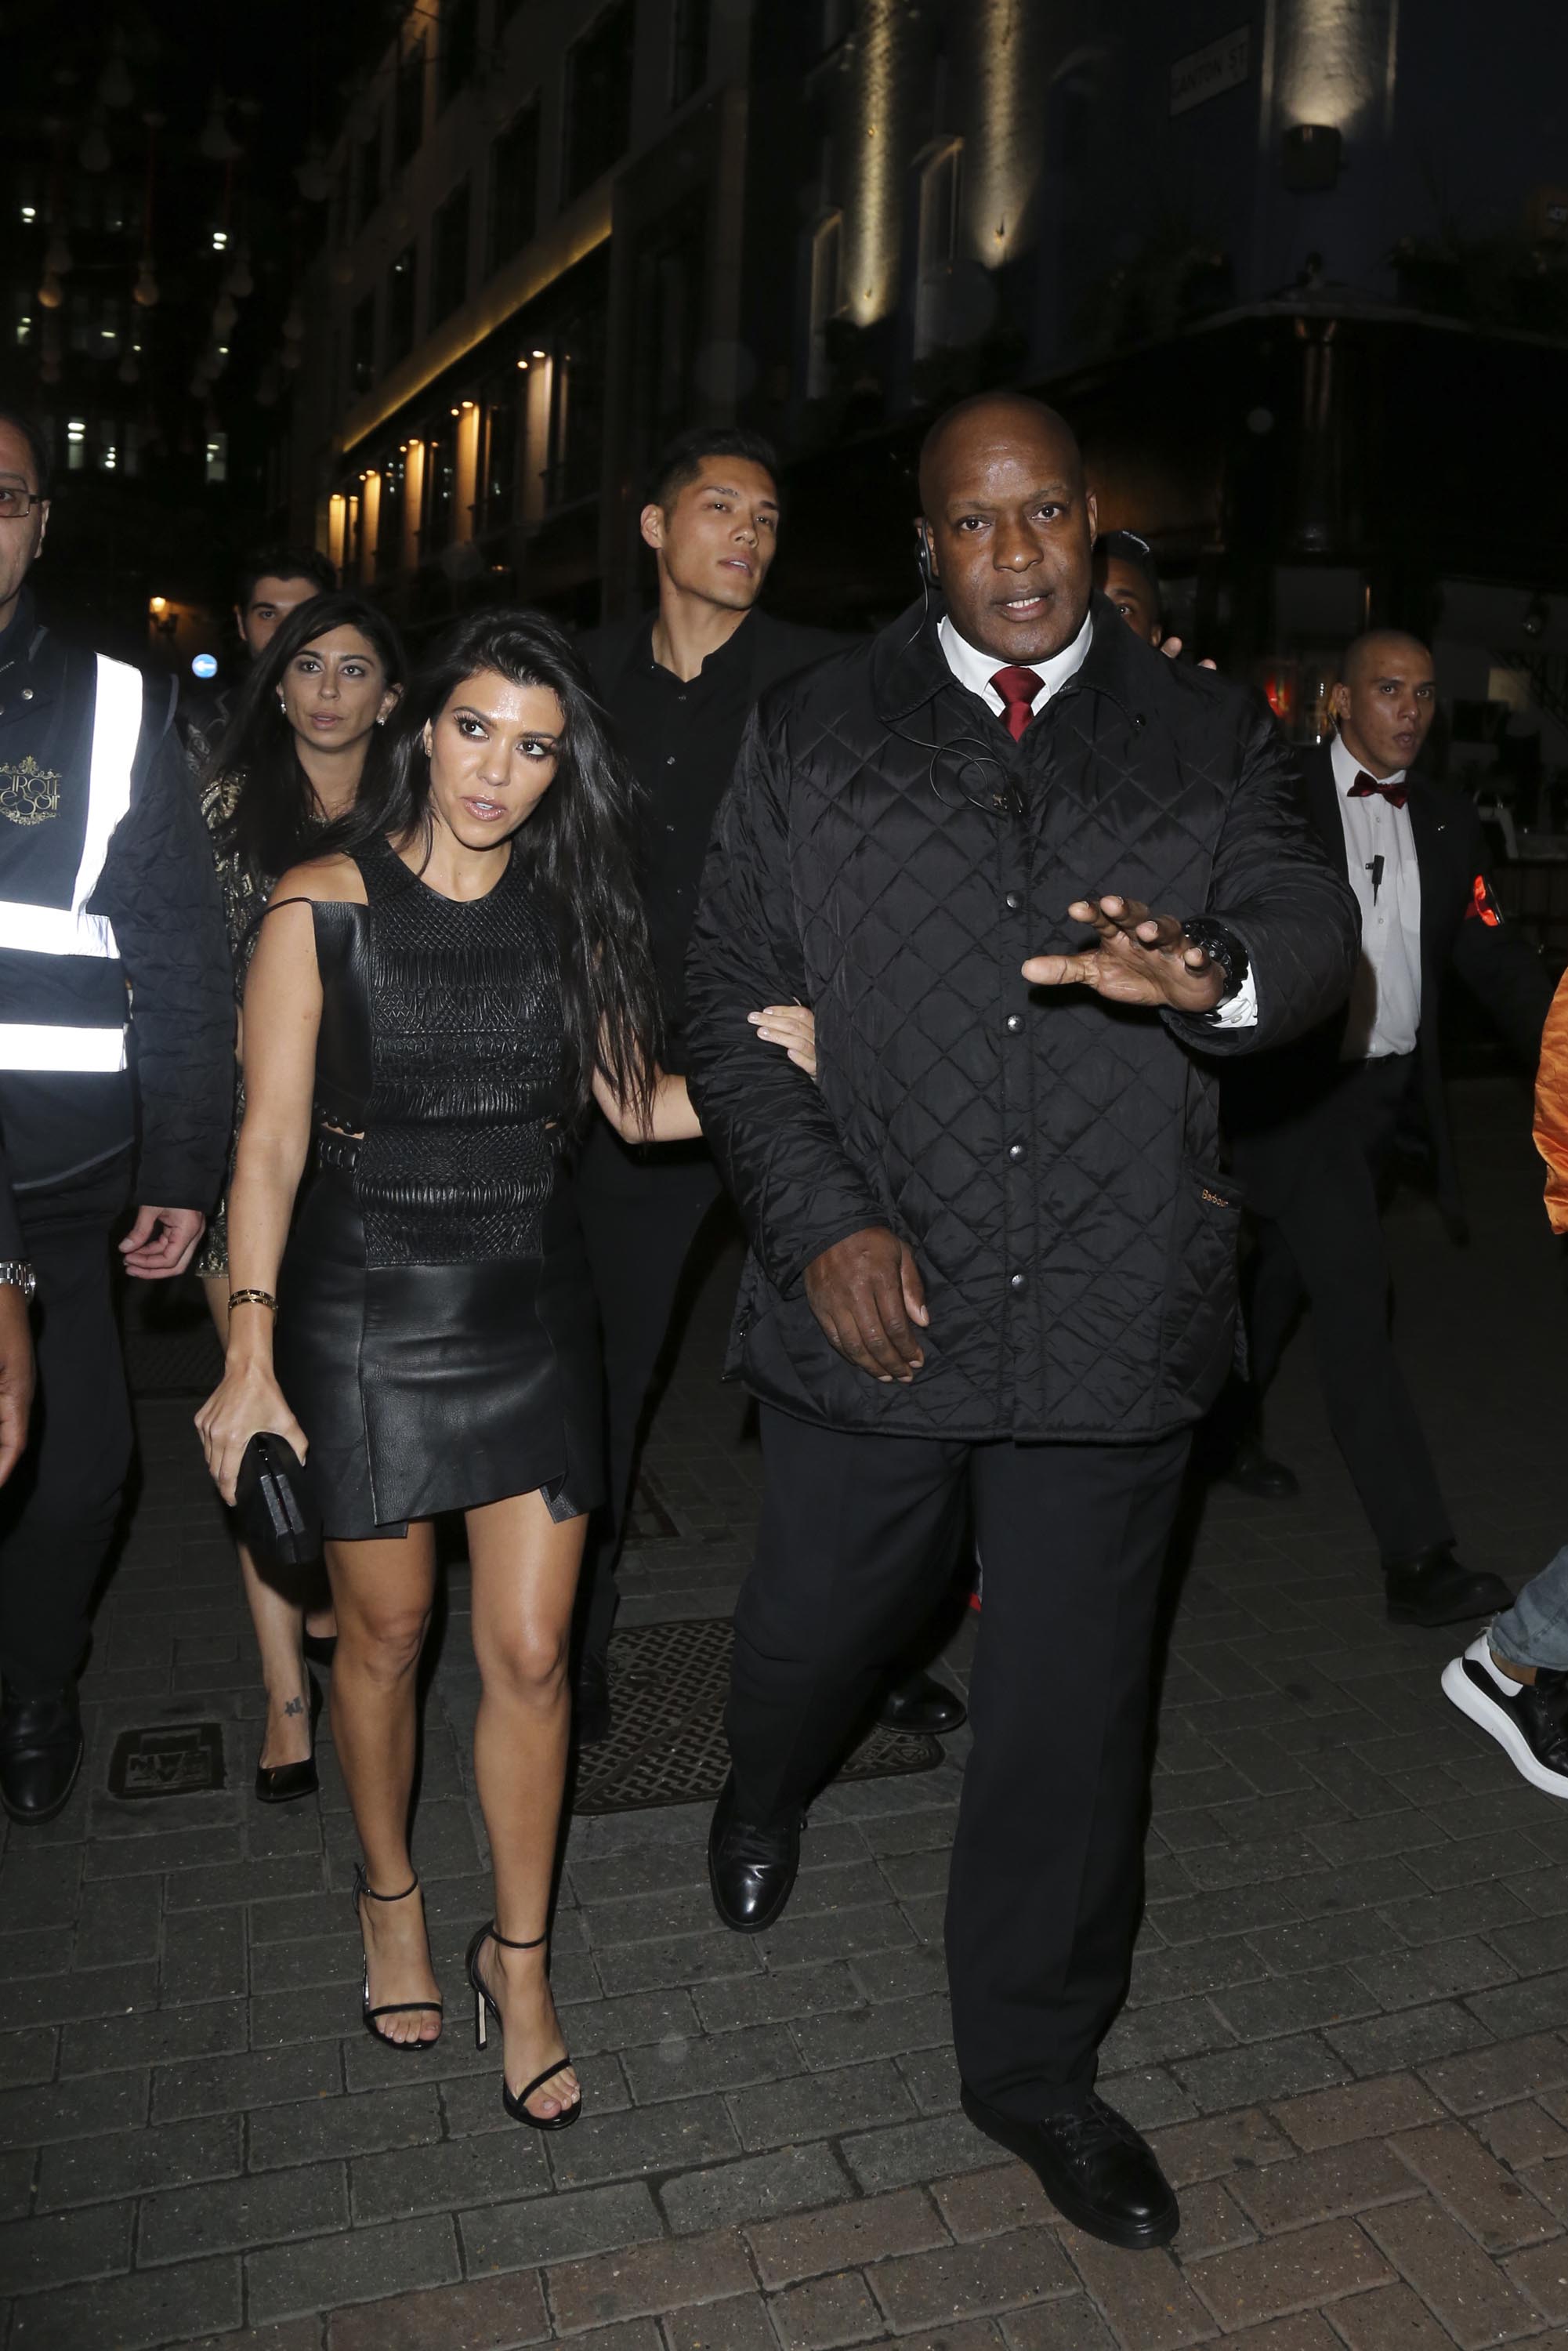 Kourtney Kardashian out and about in London